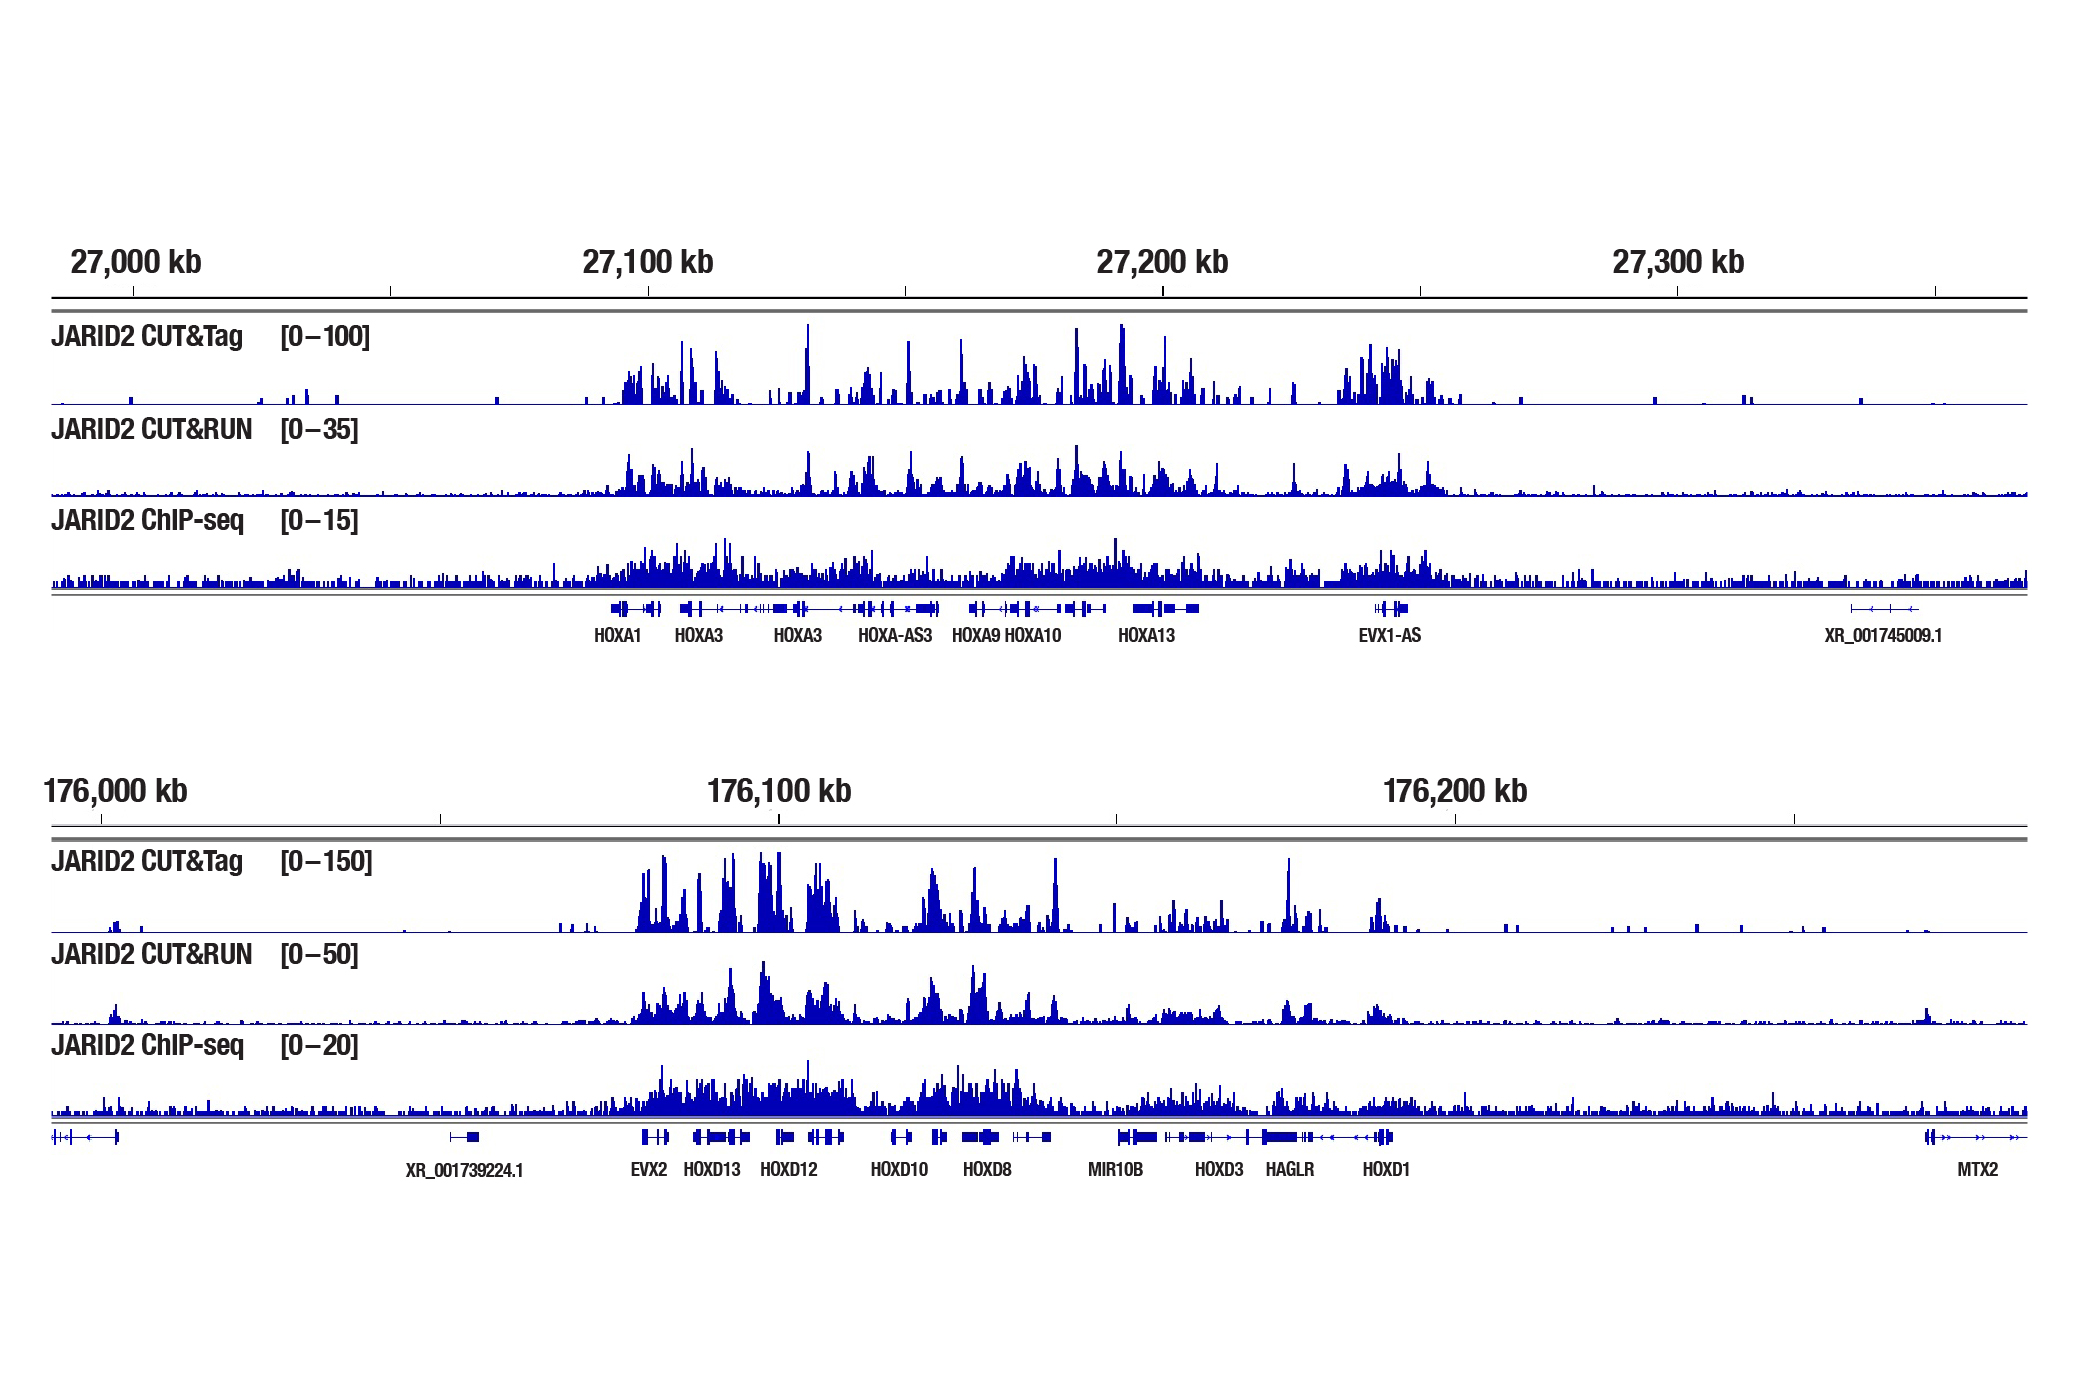 JARID2 sequencing results for ChIP-seq, CUT&RUN, and CUT&Tag